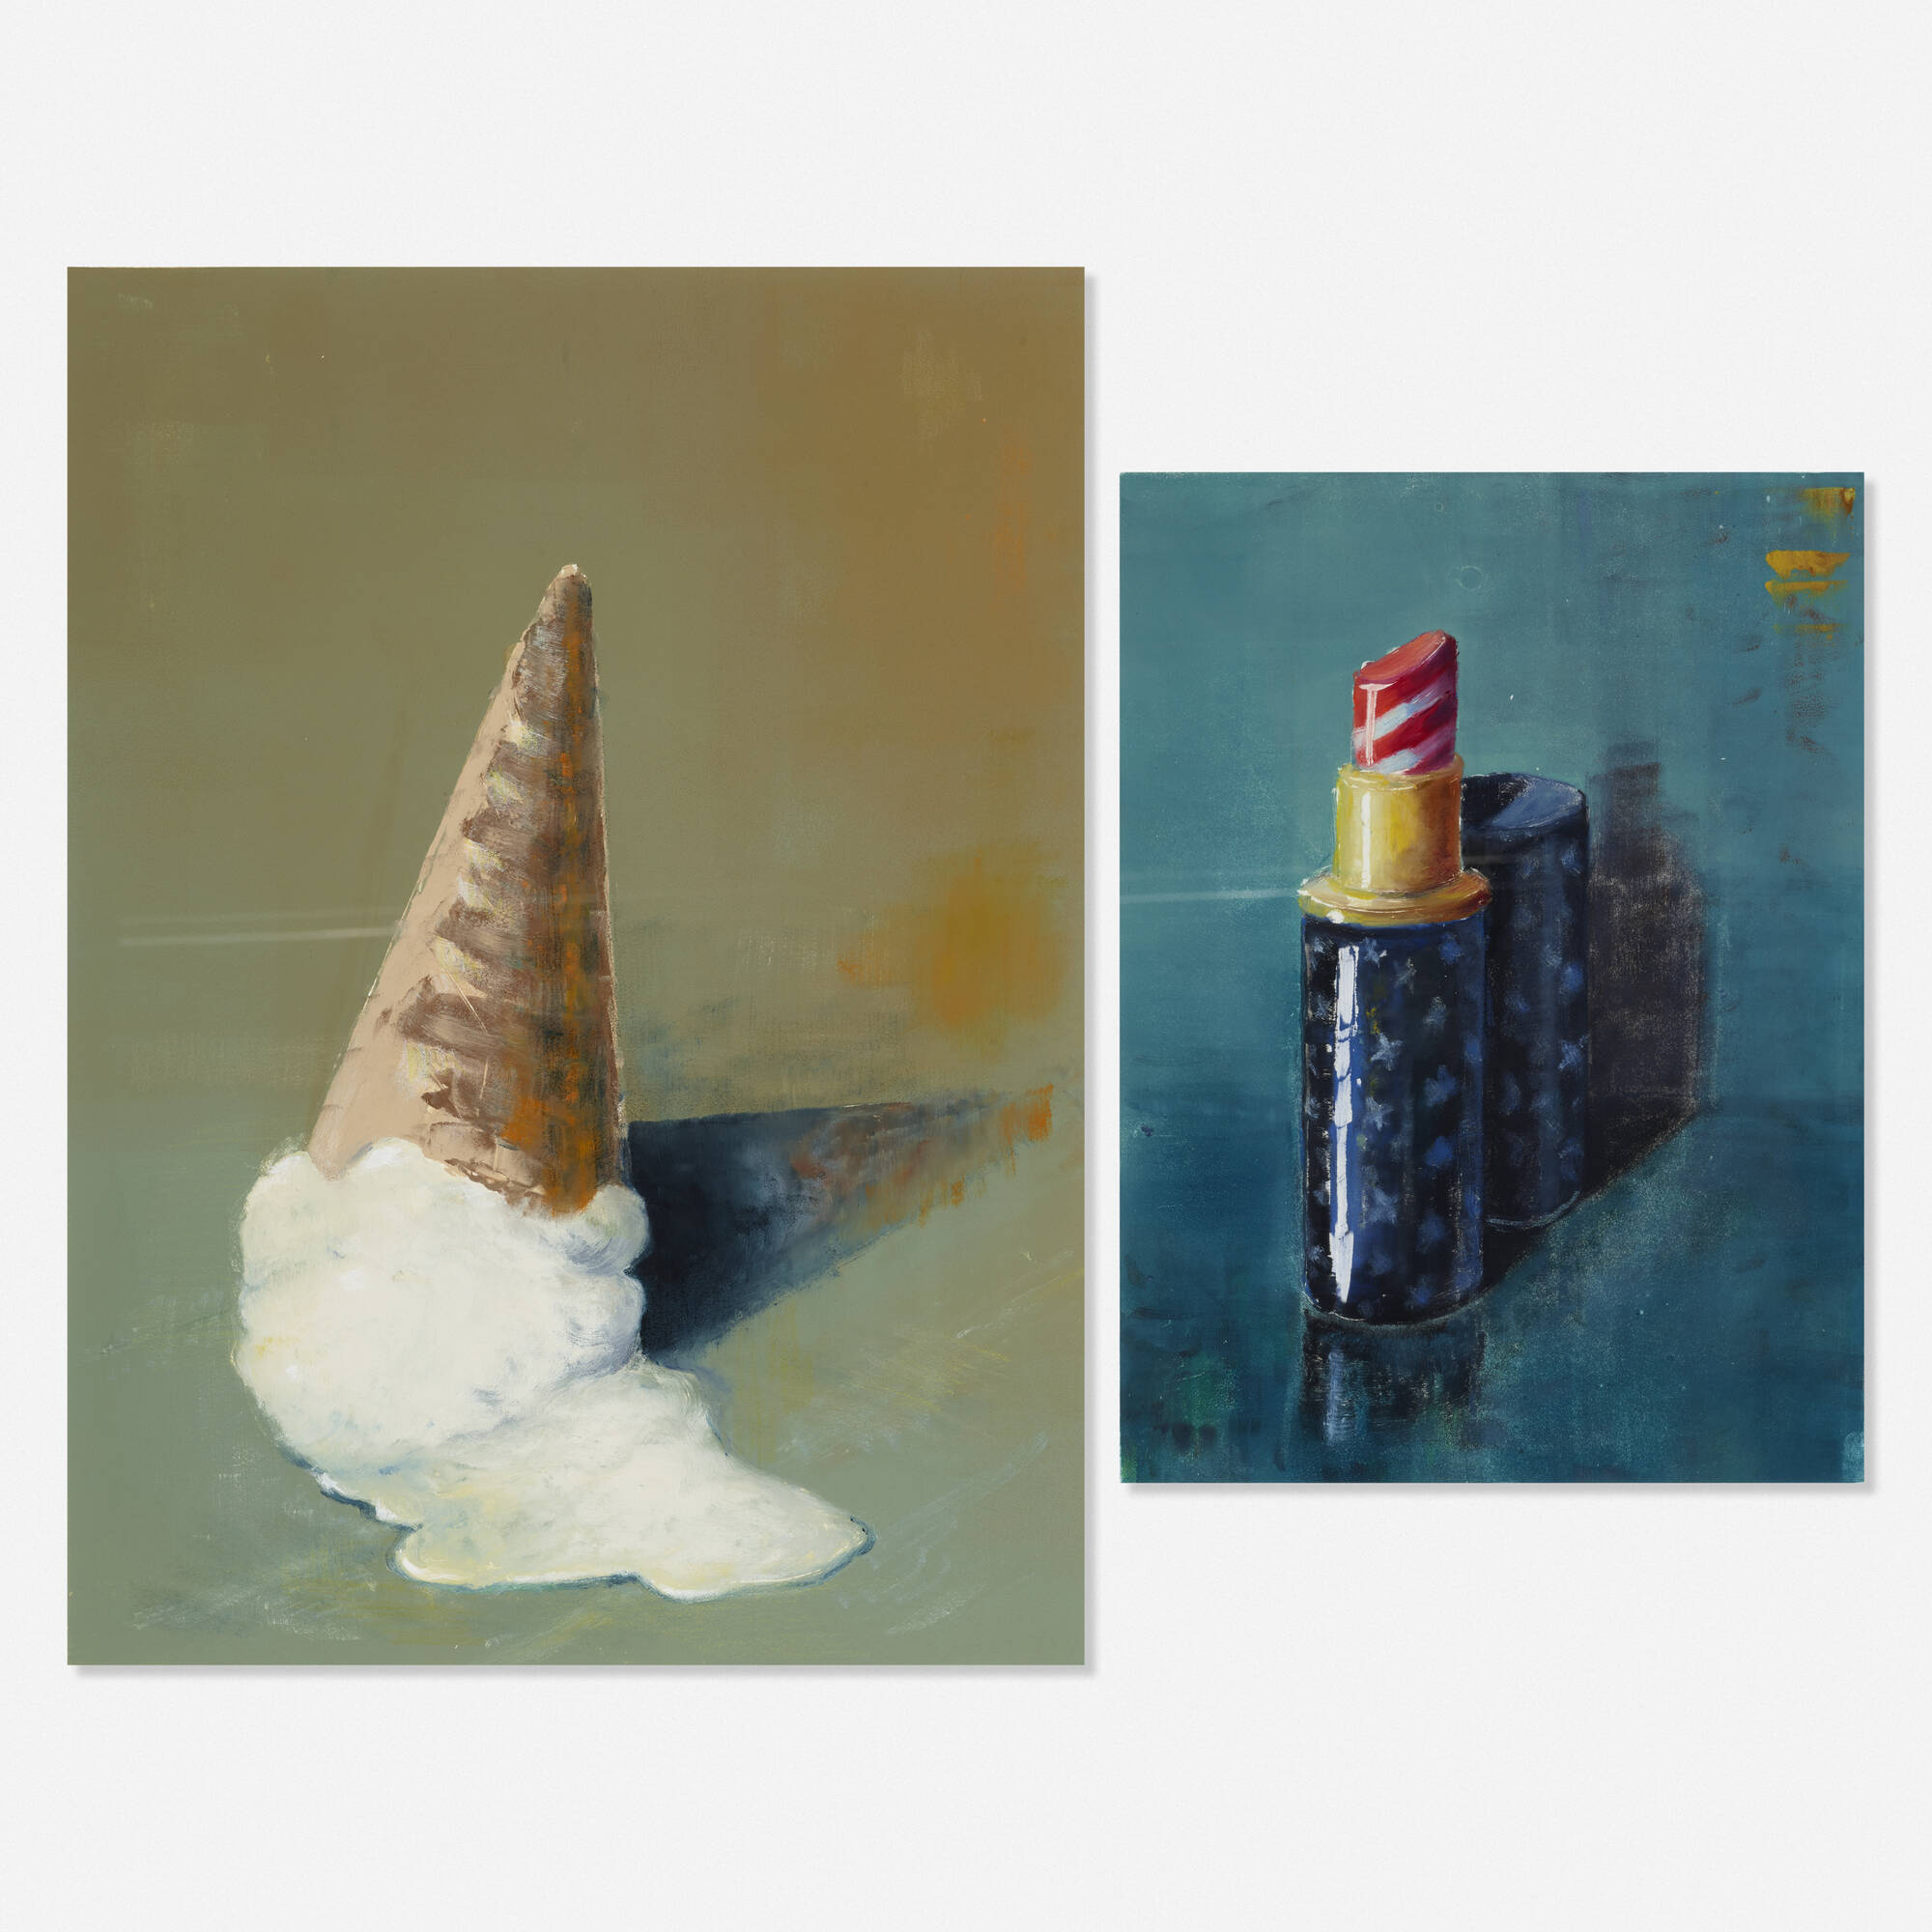 https://www.ragoarts.com/items/index/2000/1365_1_unreserved_day_1_august_2020_robert_valdes_cheap_soft_ice_cream_ii_and_an_american_beauty_two_works__rago_auction.jpg?t=1692722507